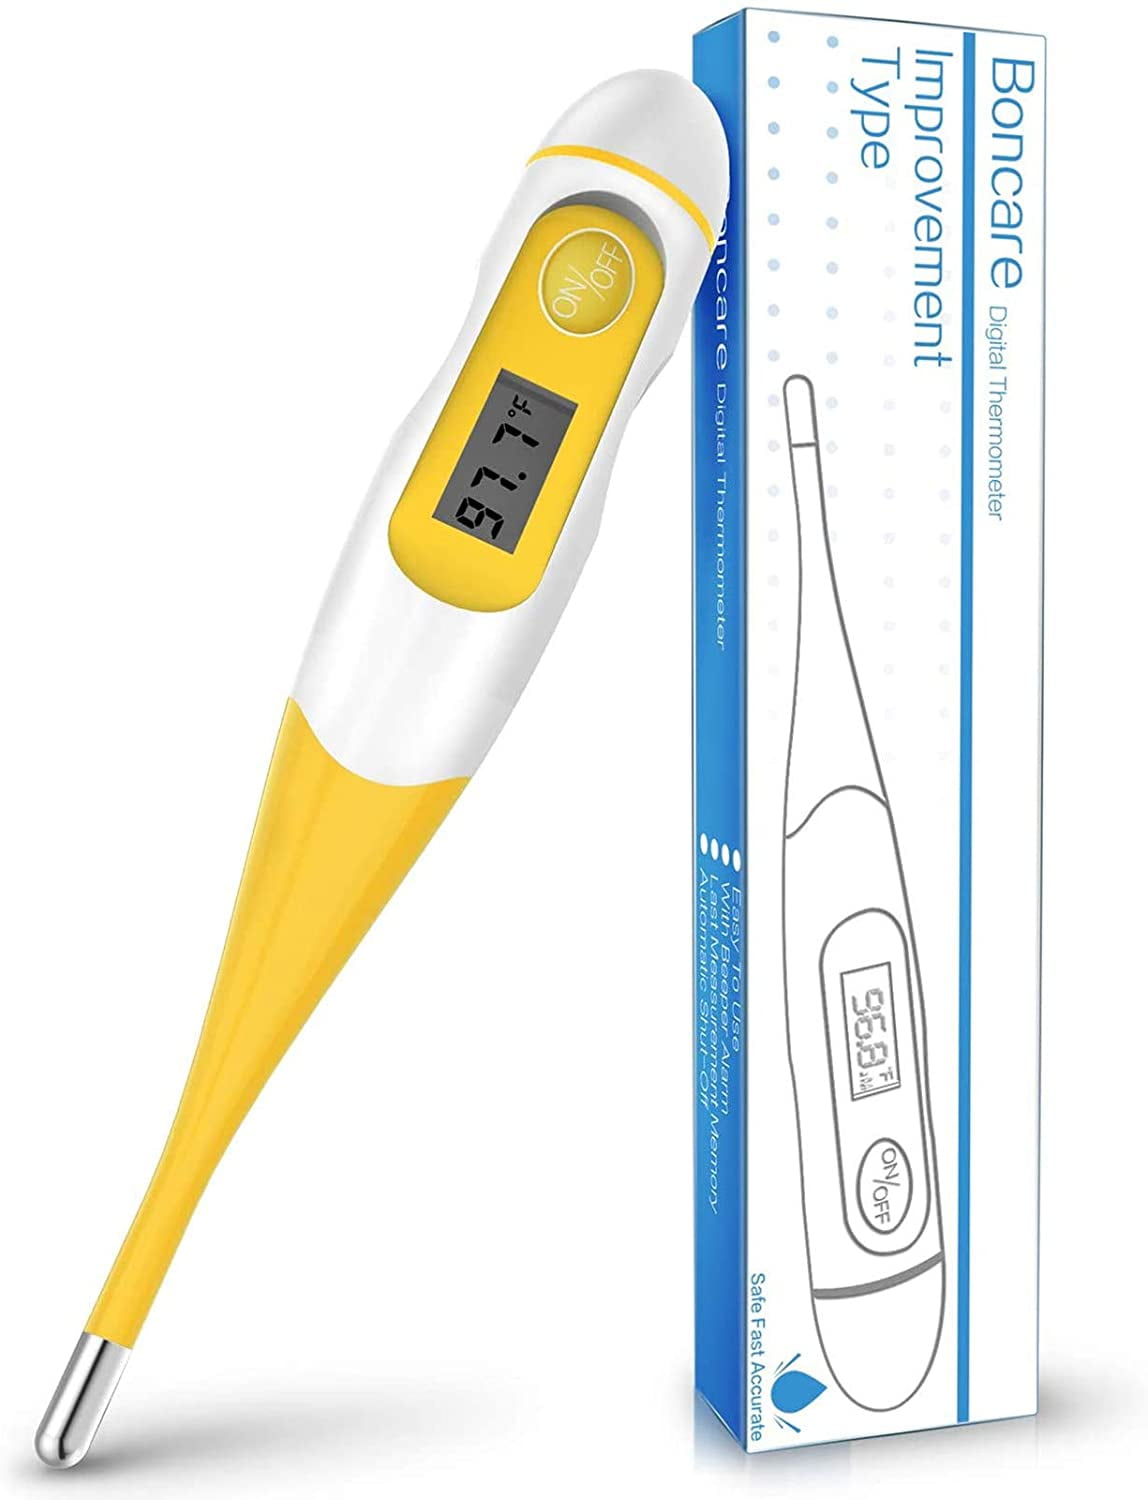 SEJOY Digital Oral Thermometer with Fever Alert, Accurate Home Thermometer  for Baby 